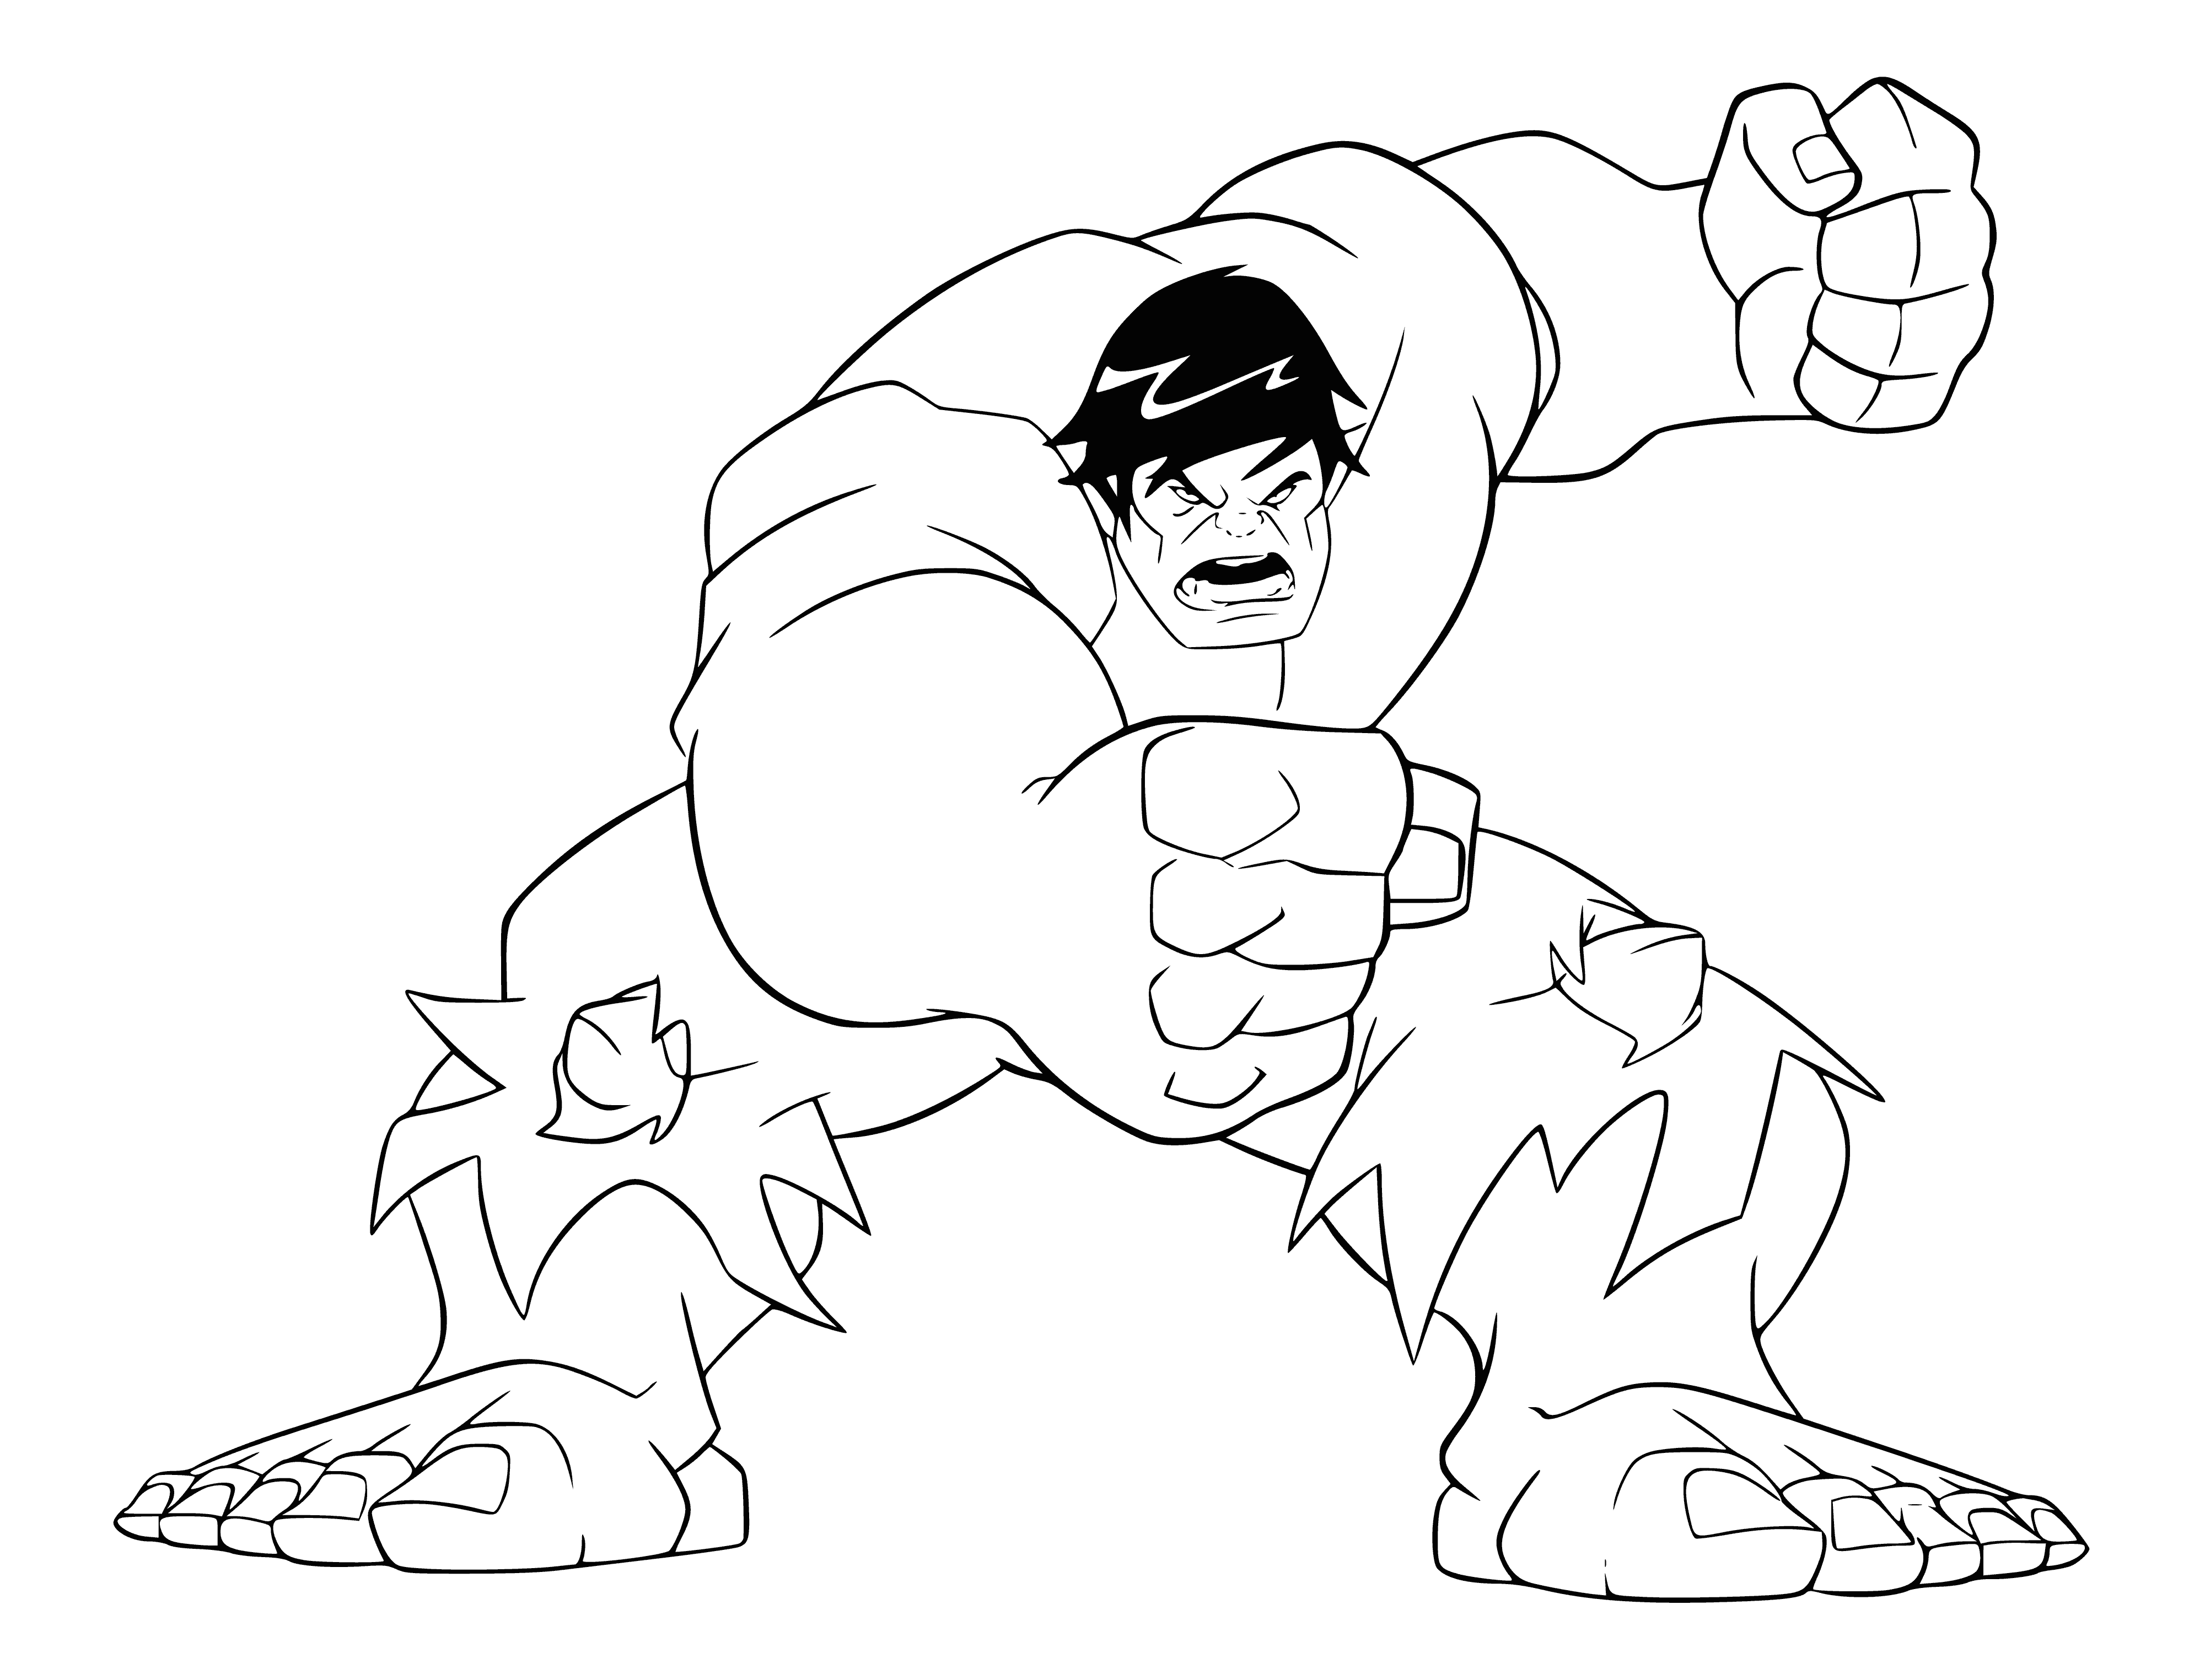 coloring page: The Avengers team rely on the Hulk to save the world, using his immense strength to defeat enemies and protect the planet.